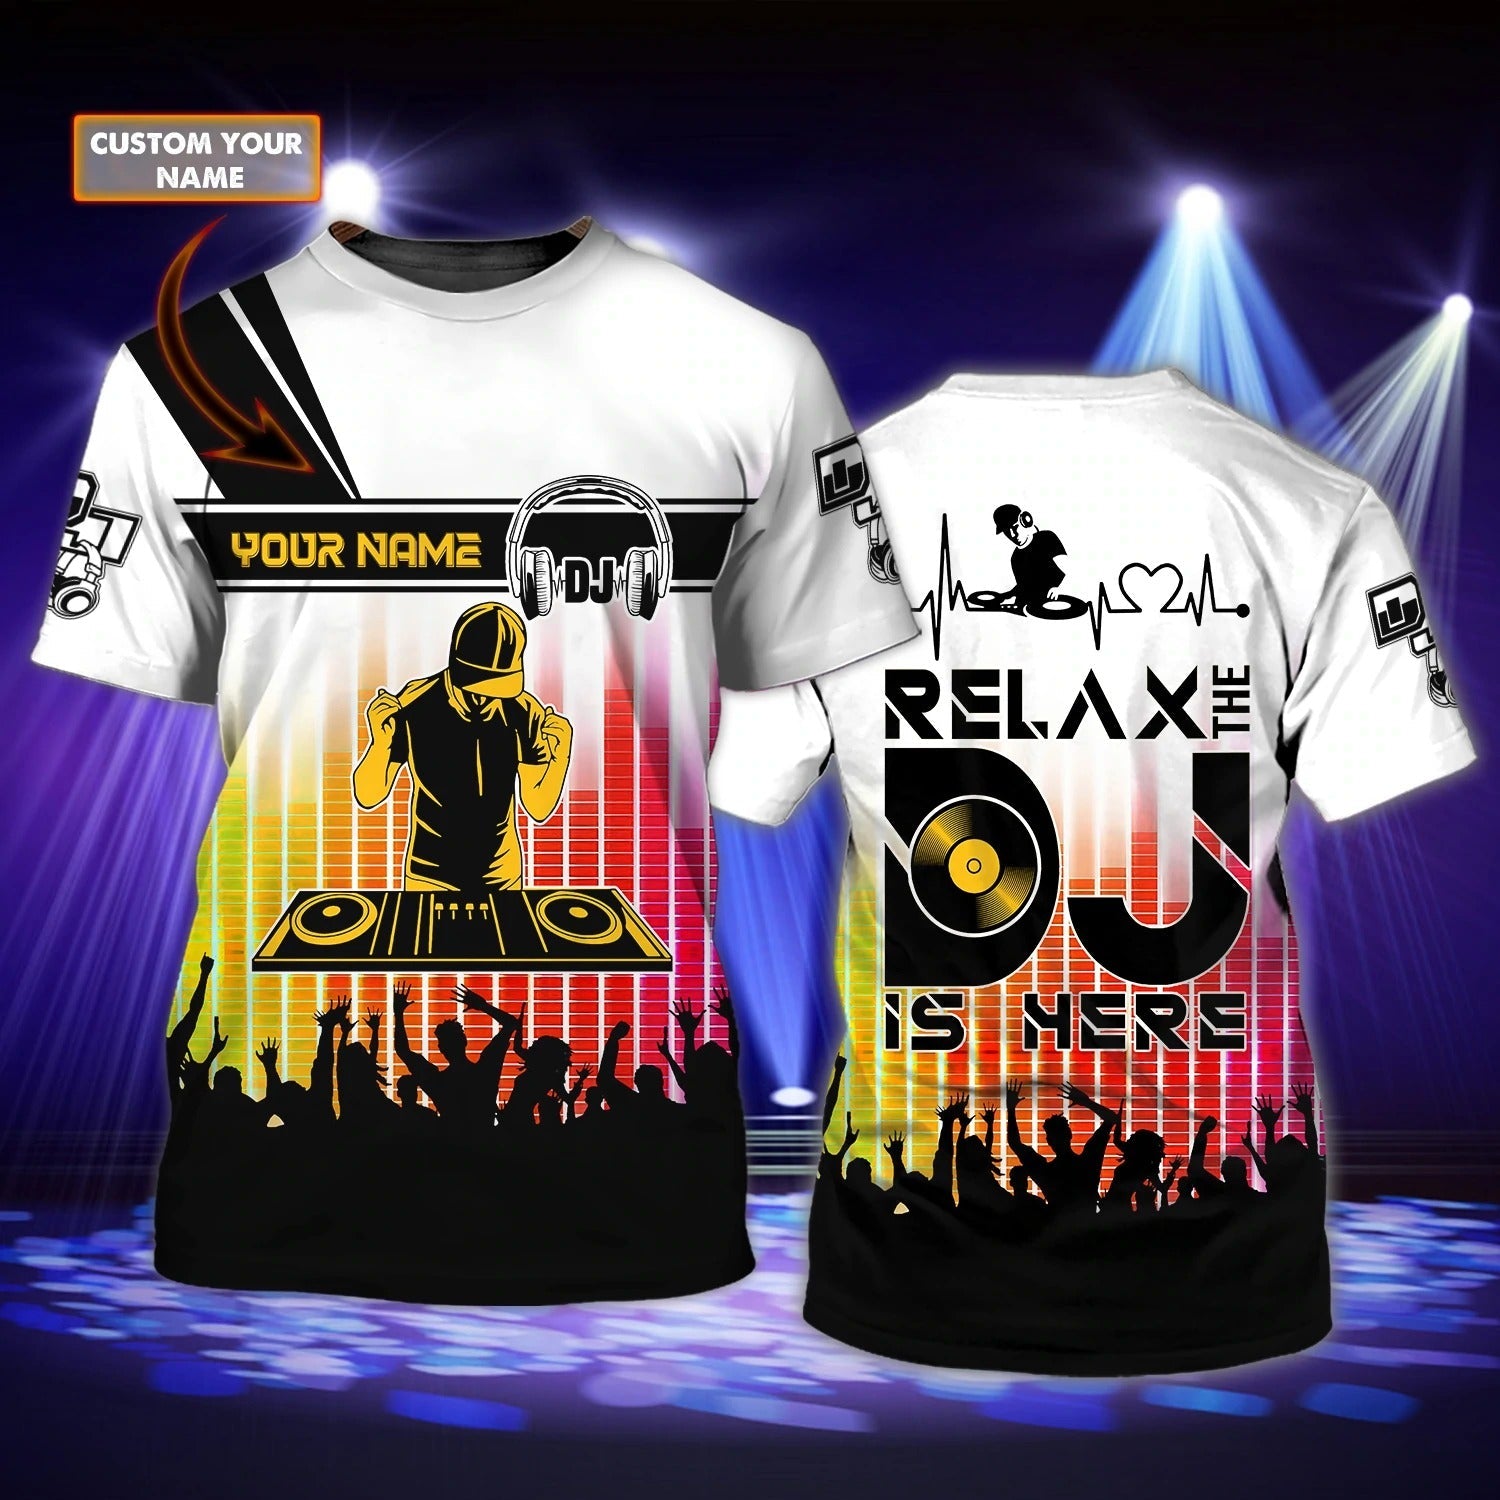 Personalized 3D All Over Printed Dj Shirts For Men And Women/ Funny Gift For A Dj/ Disc Jockey Shirts